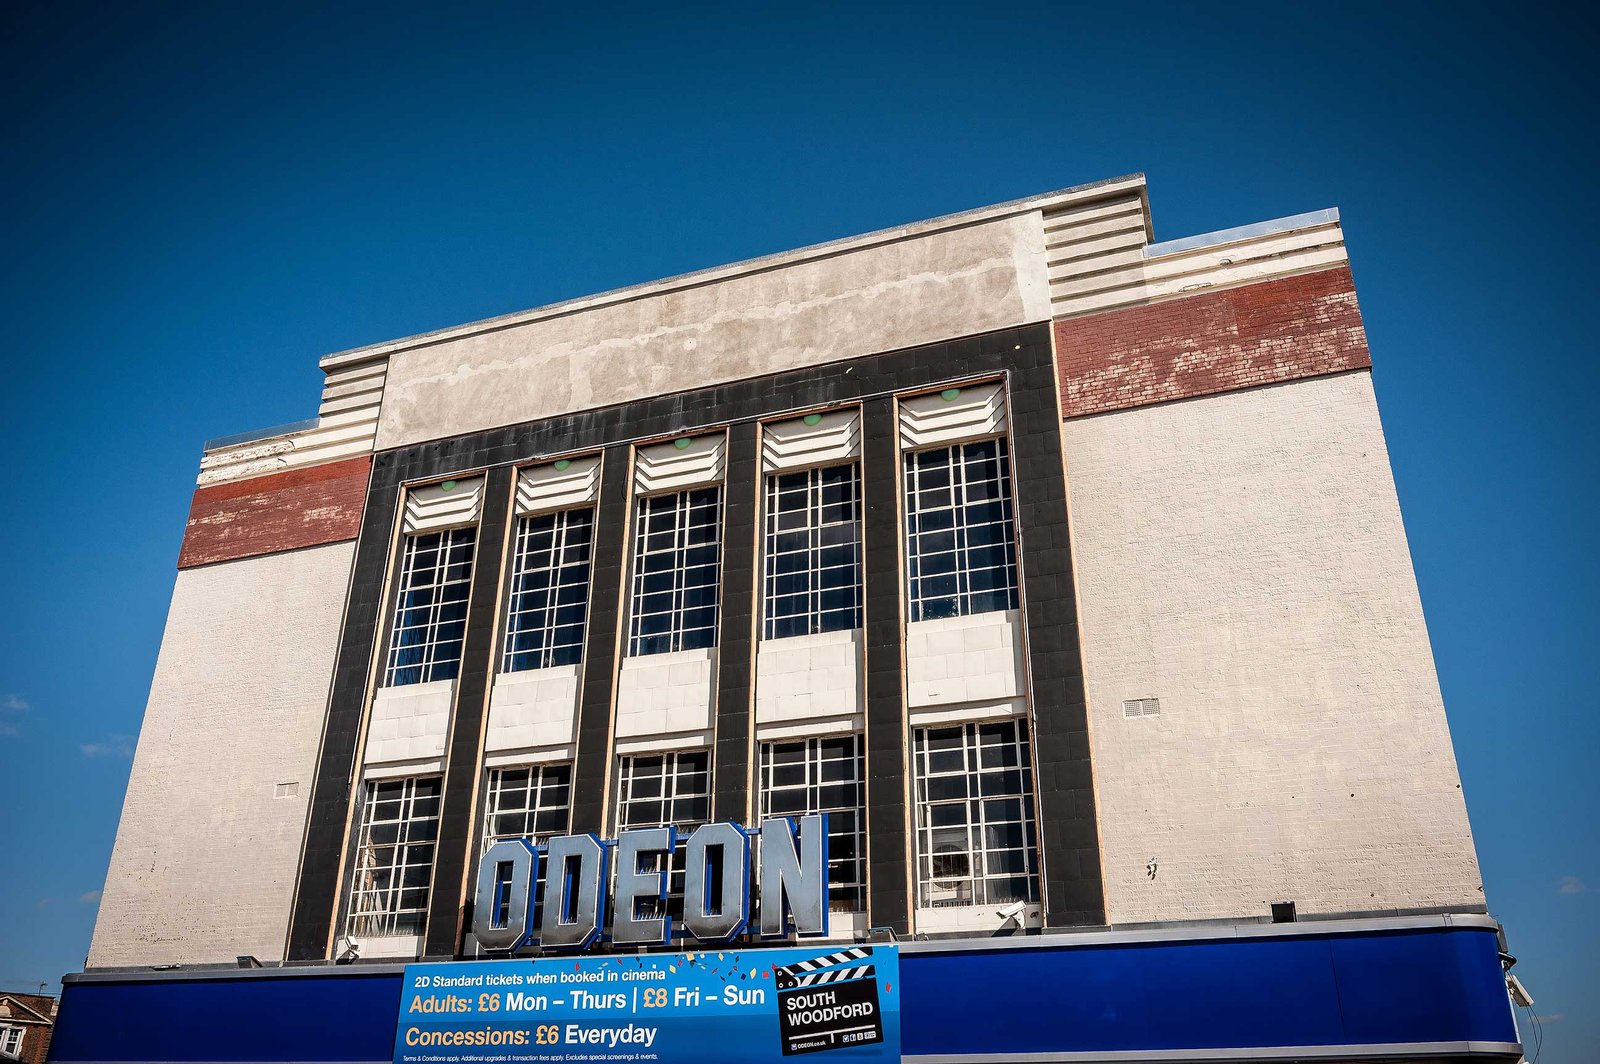 South Woodford Odeon